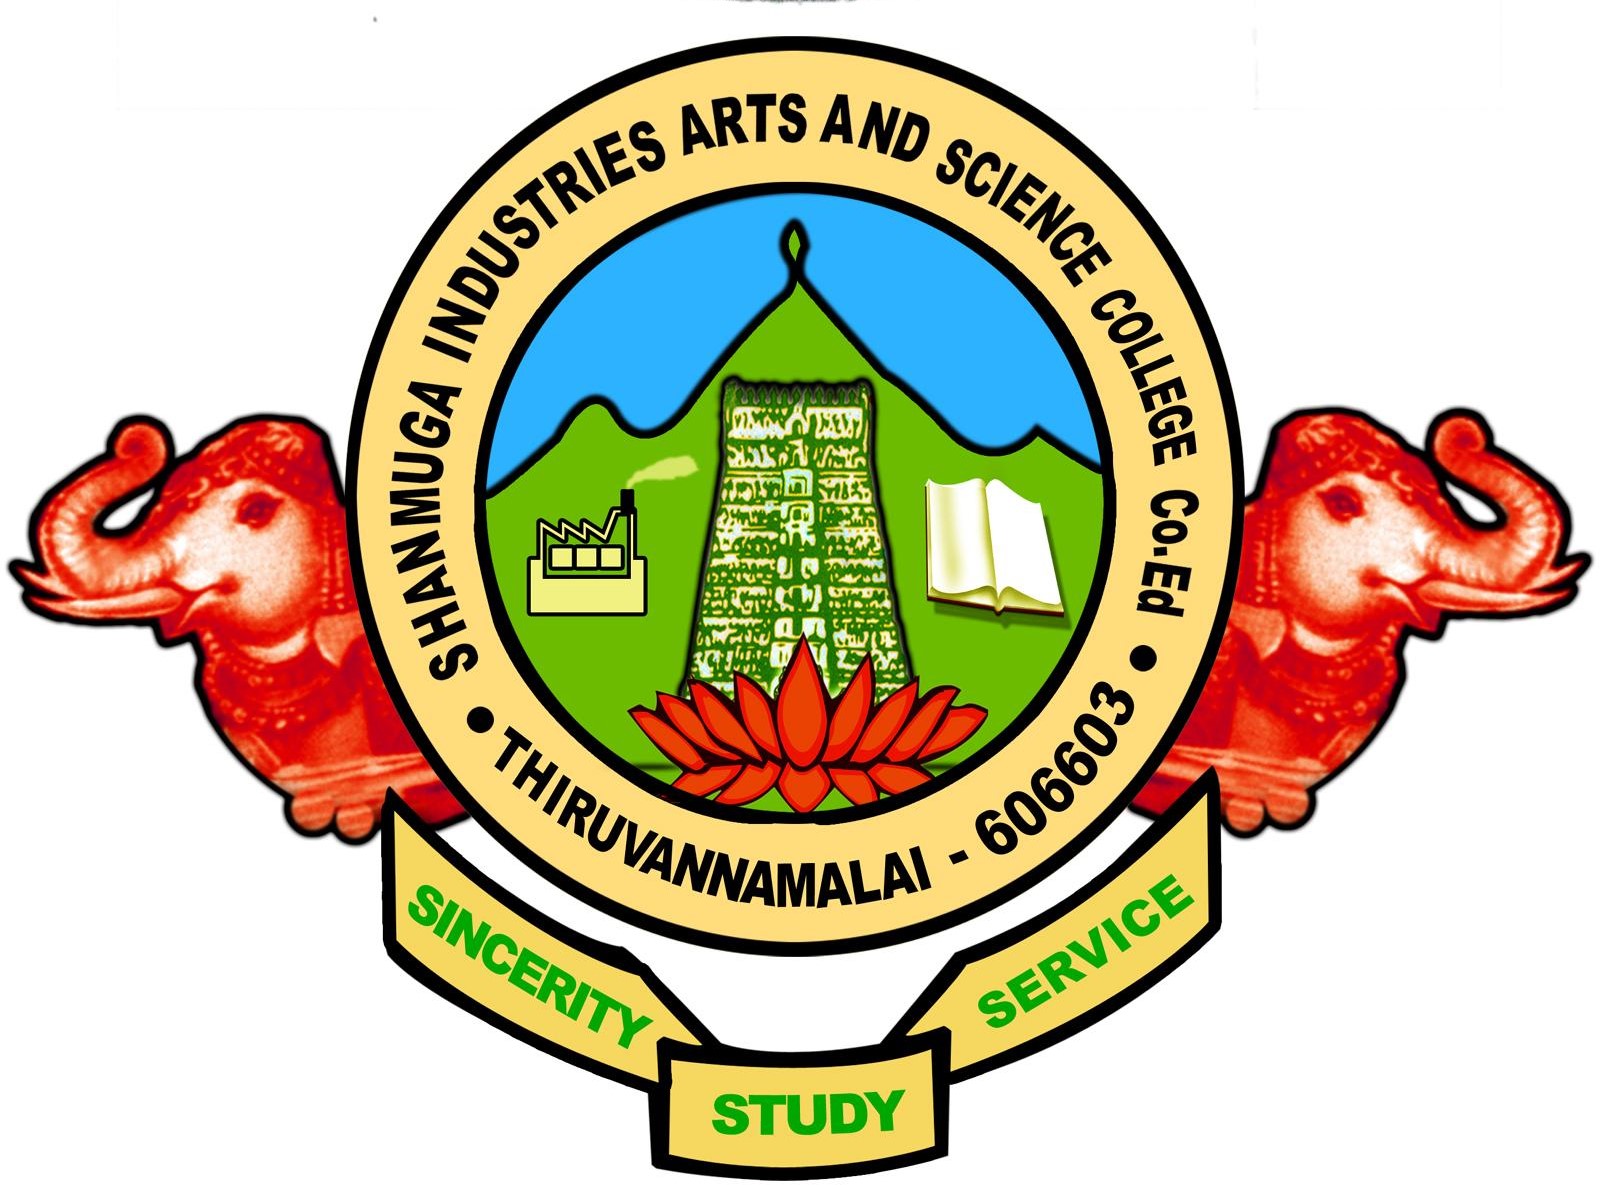 SHANMUGA INDUSTRIES ARTS AND SCIENCE COLLEGE (CO.ED)